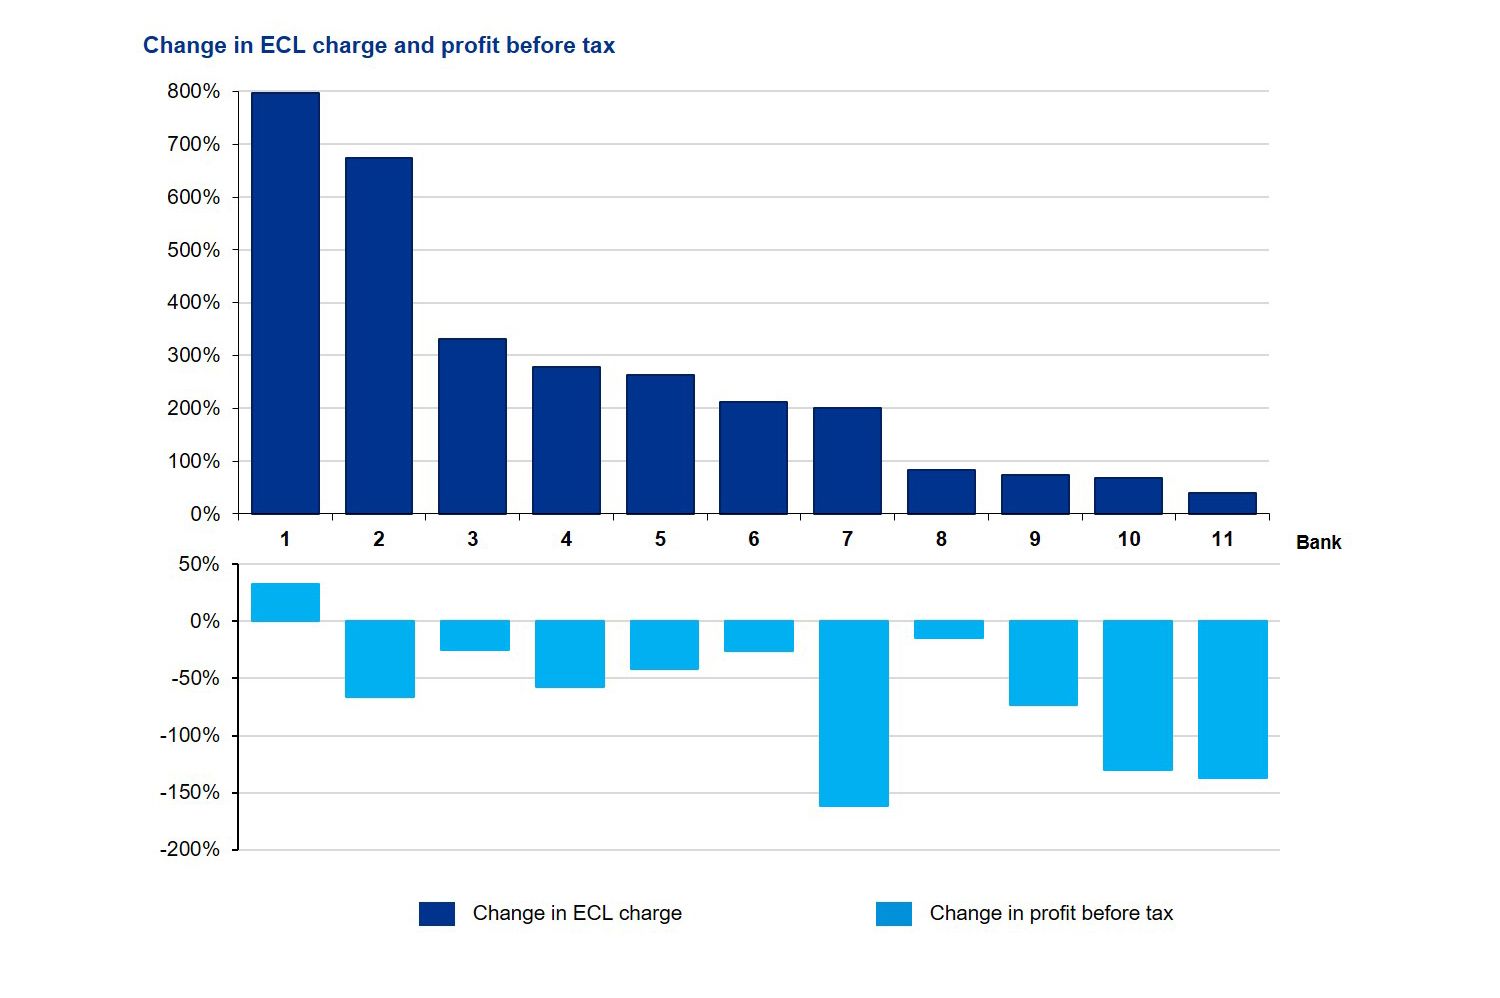 Changes in ECL charge and profit before tax